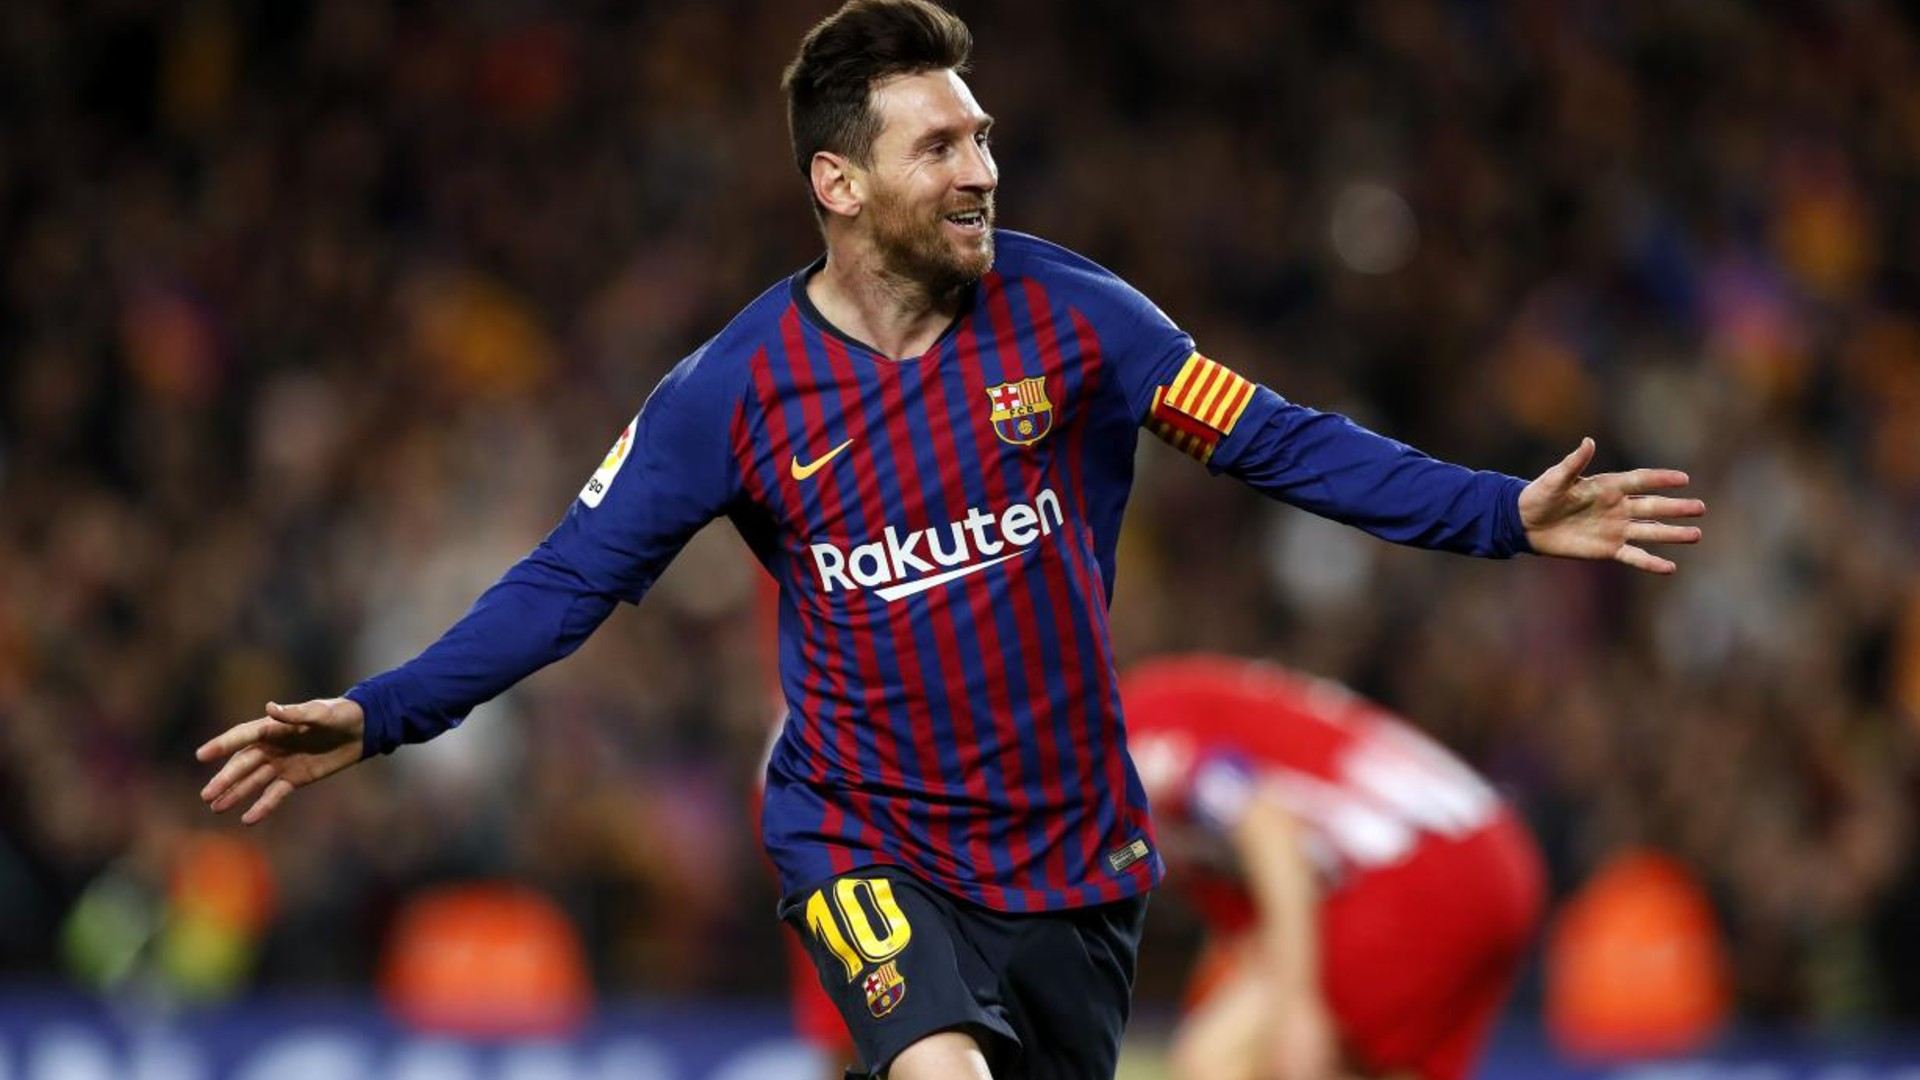 Lionel Messi wins his 8th Pichichi Trophy after netting 30 goals